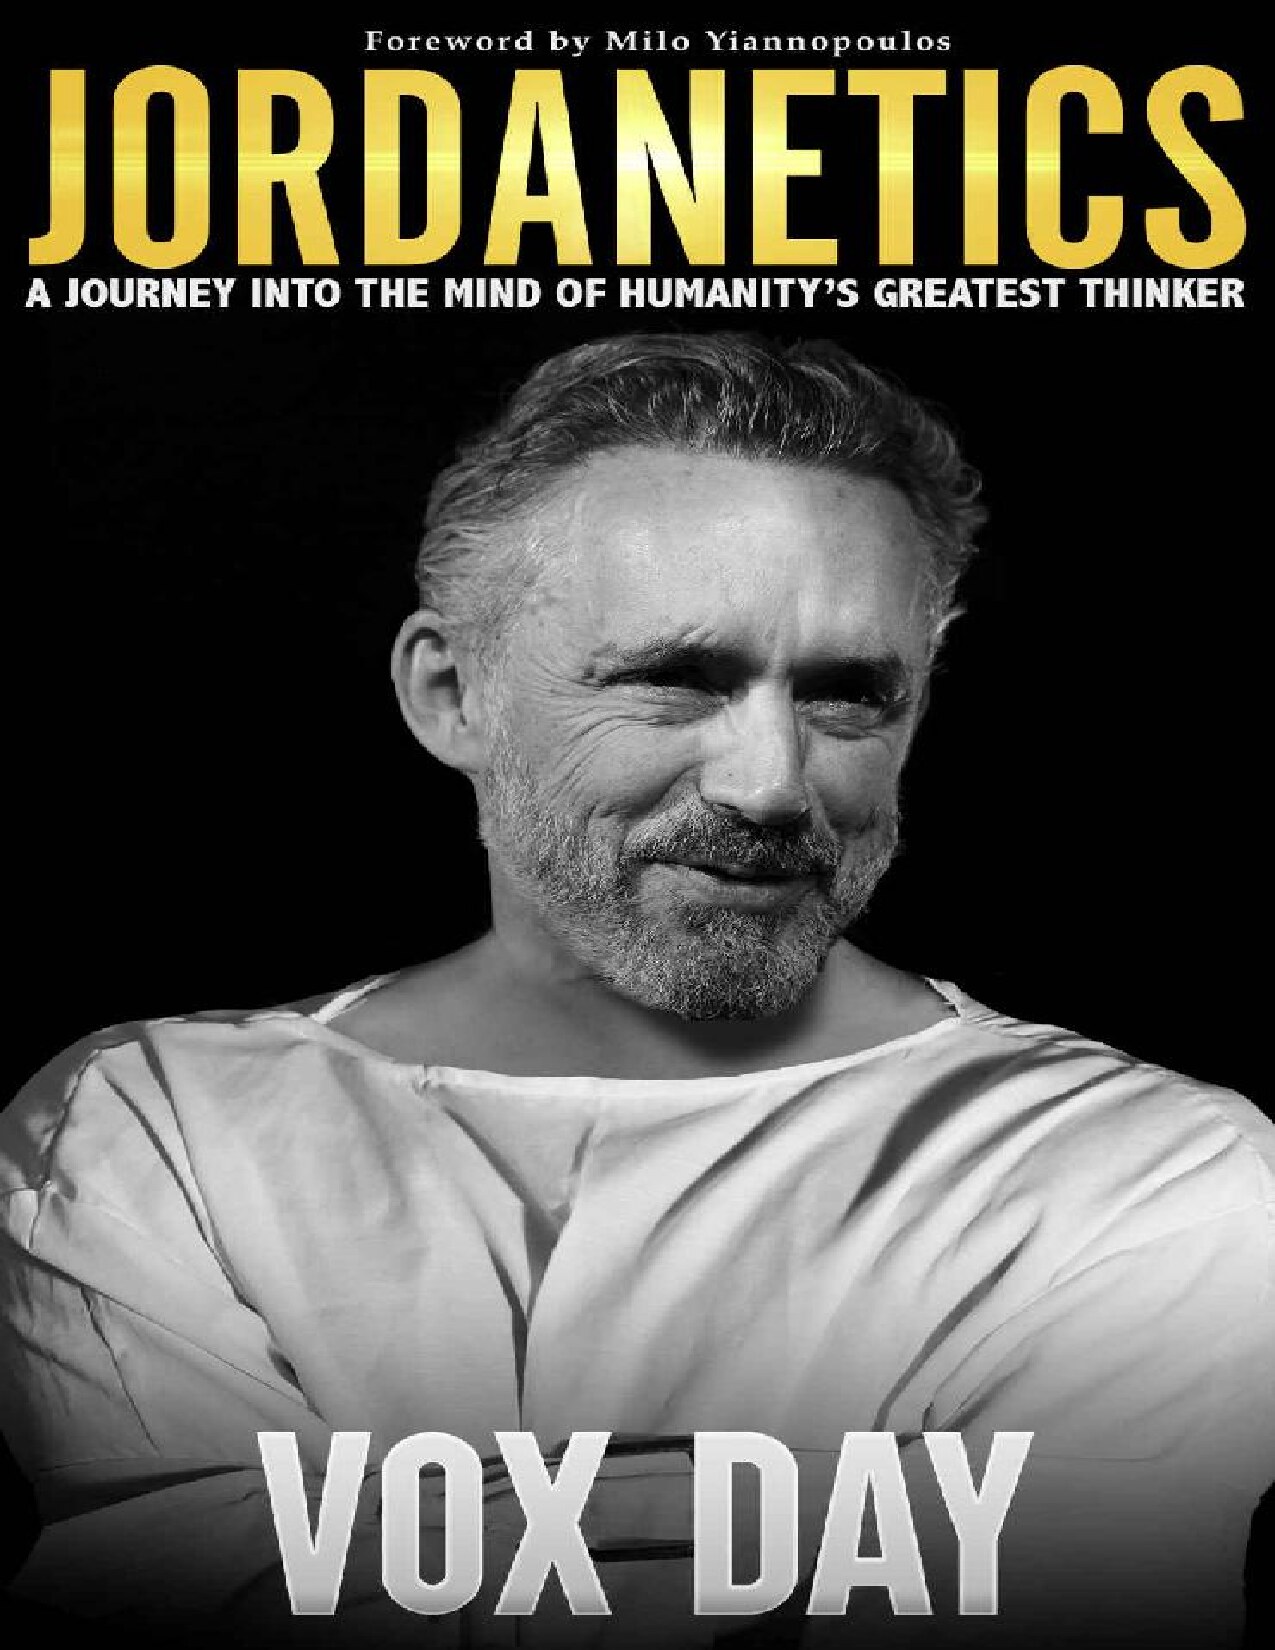 Jordanetics: A Journey Into the Mind of Humanity's Greatest Thinker